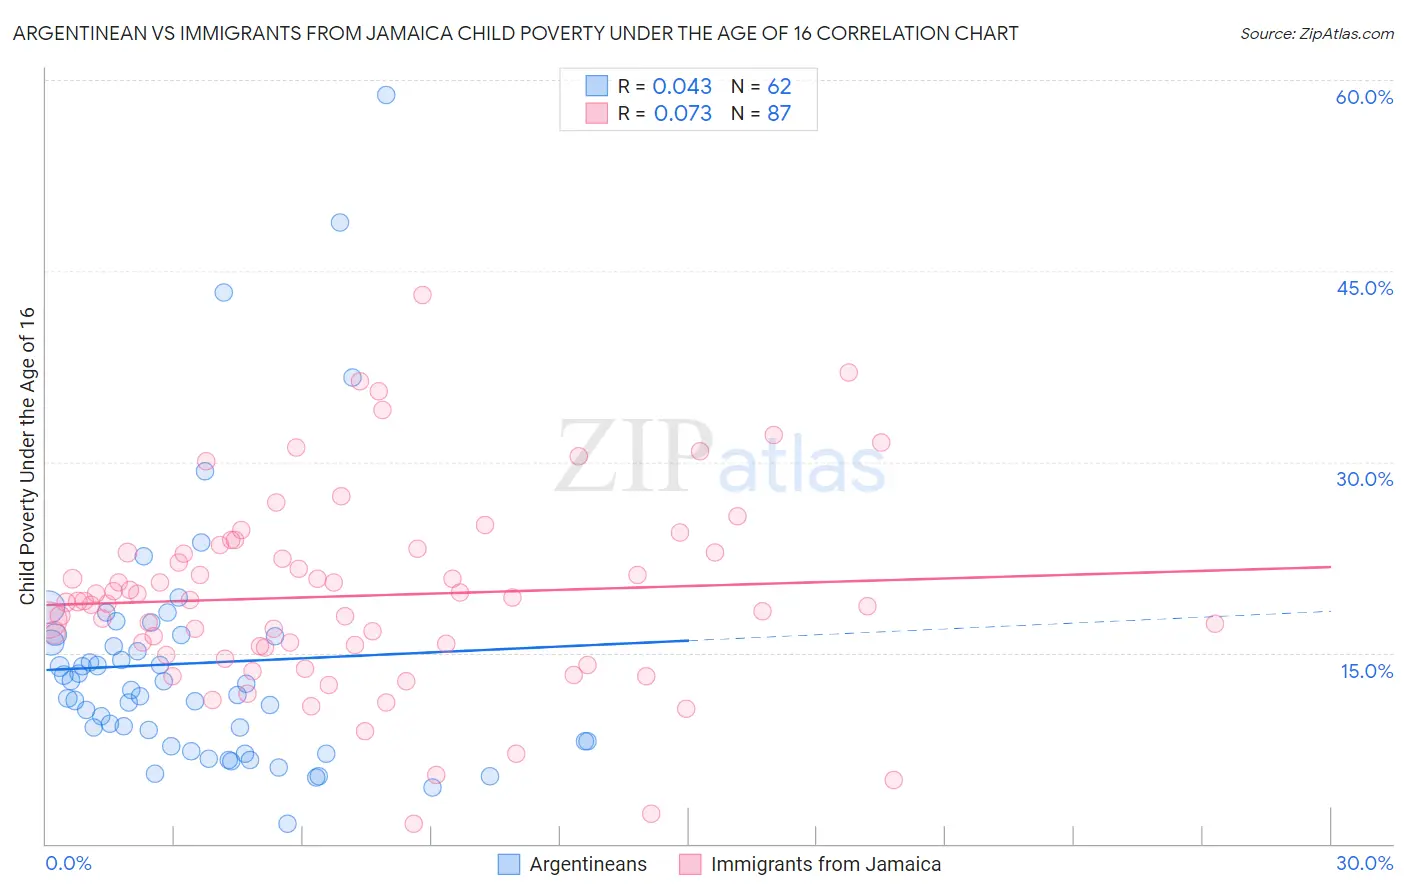 Argentinean vs Immigrants from Jamaica Child Poverty Under the Age of 16